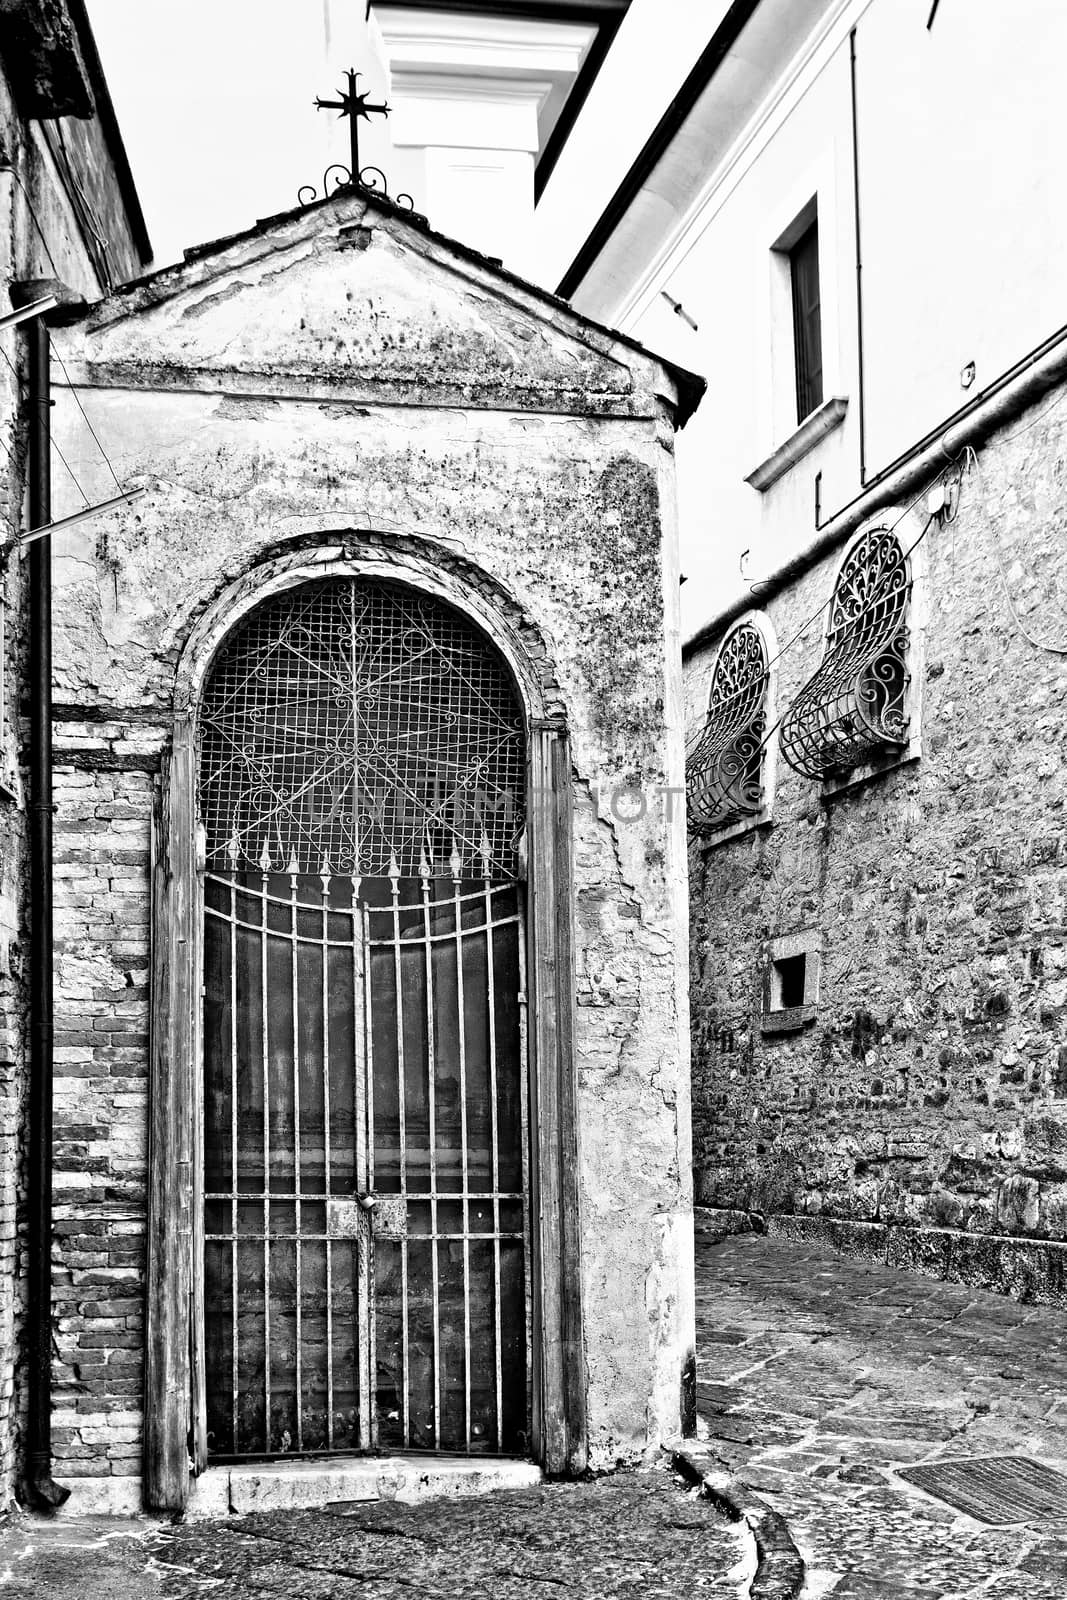 The Small Chapel on the Street of Salerno, Italy, Retro Image Filtered Style